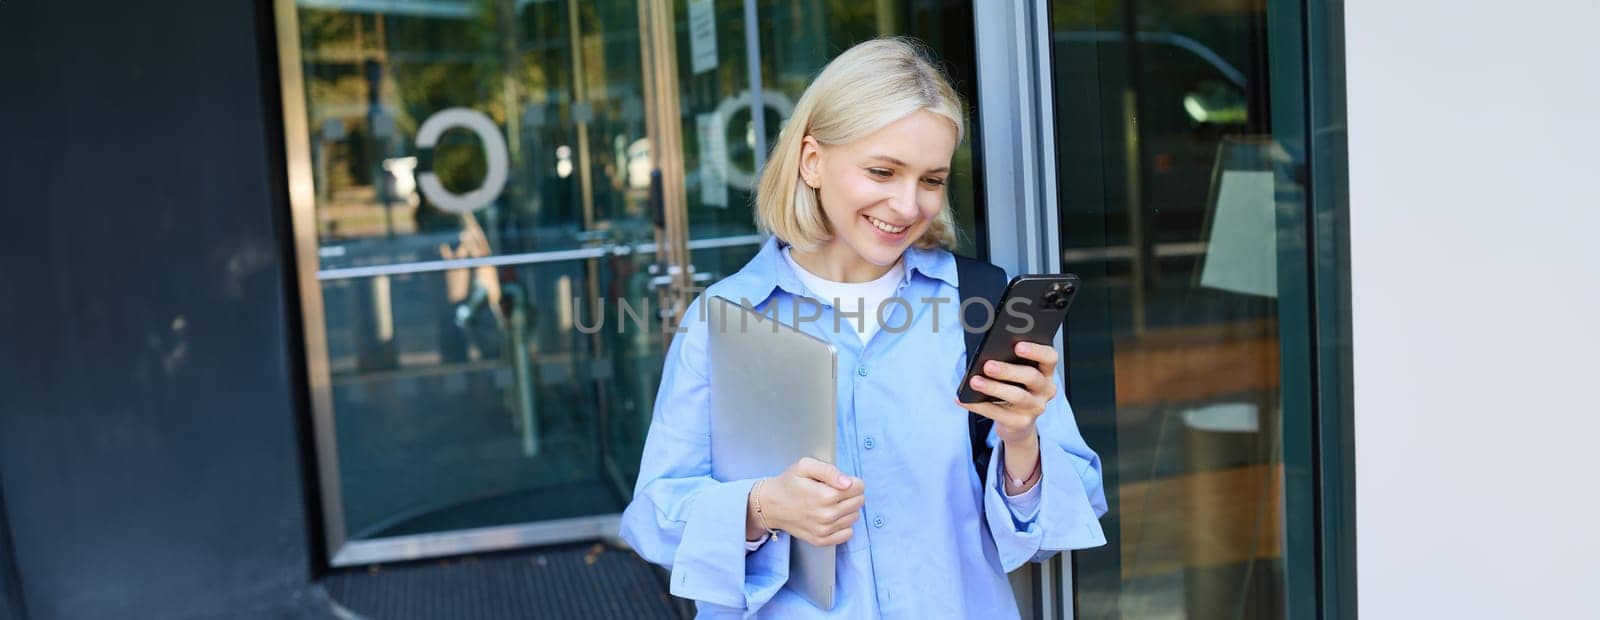 Image of young blond woman in blue shirt, holding laptop, waiting for someone near office building, using smartphone, mobile phone application.